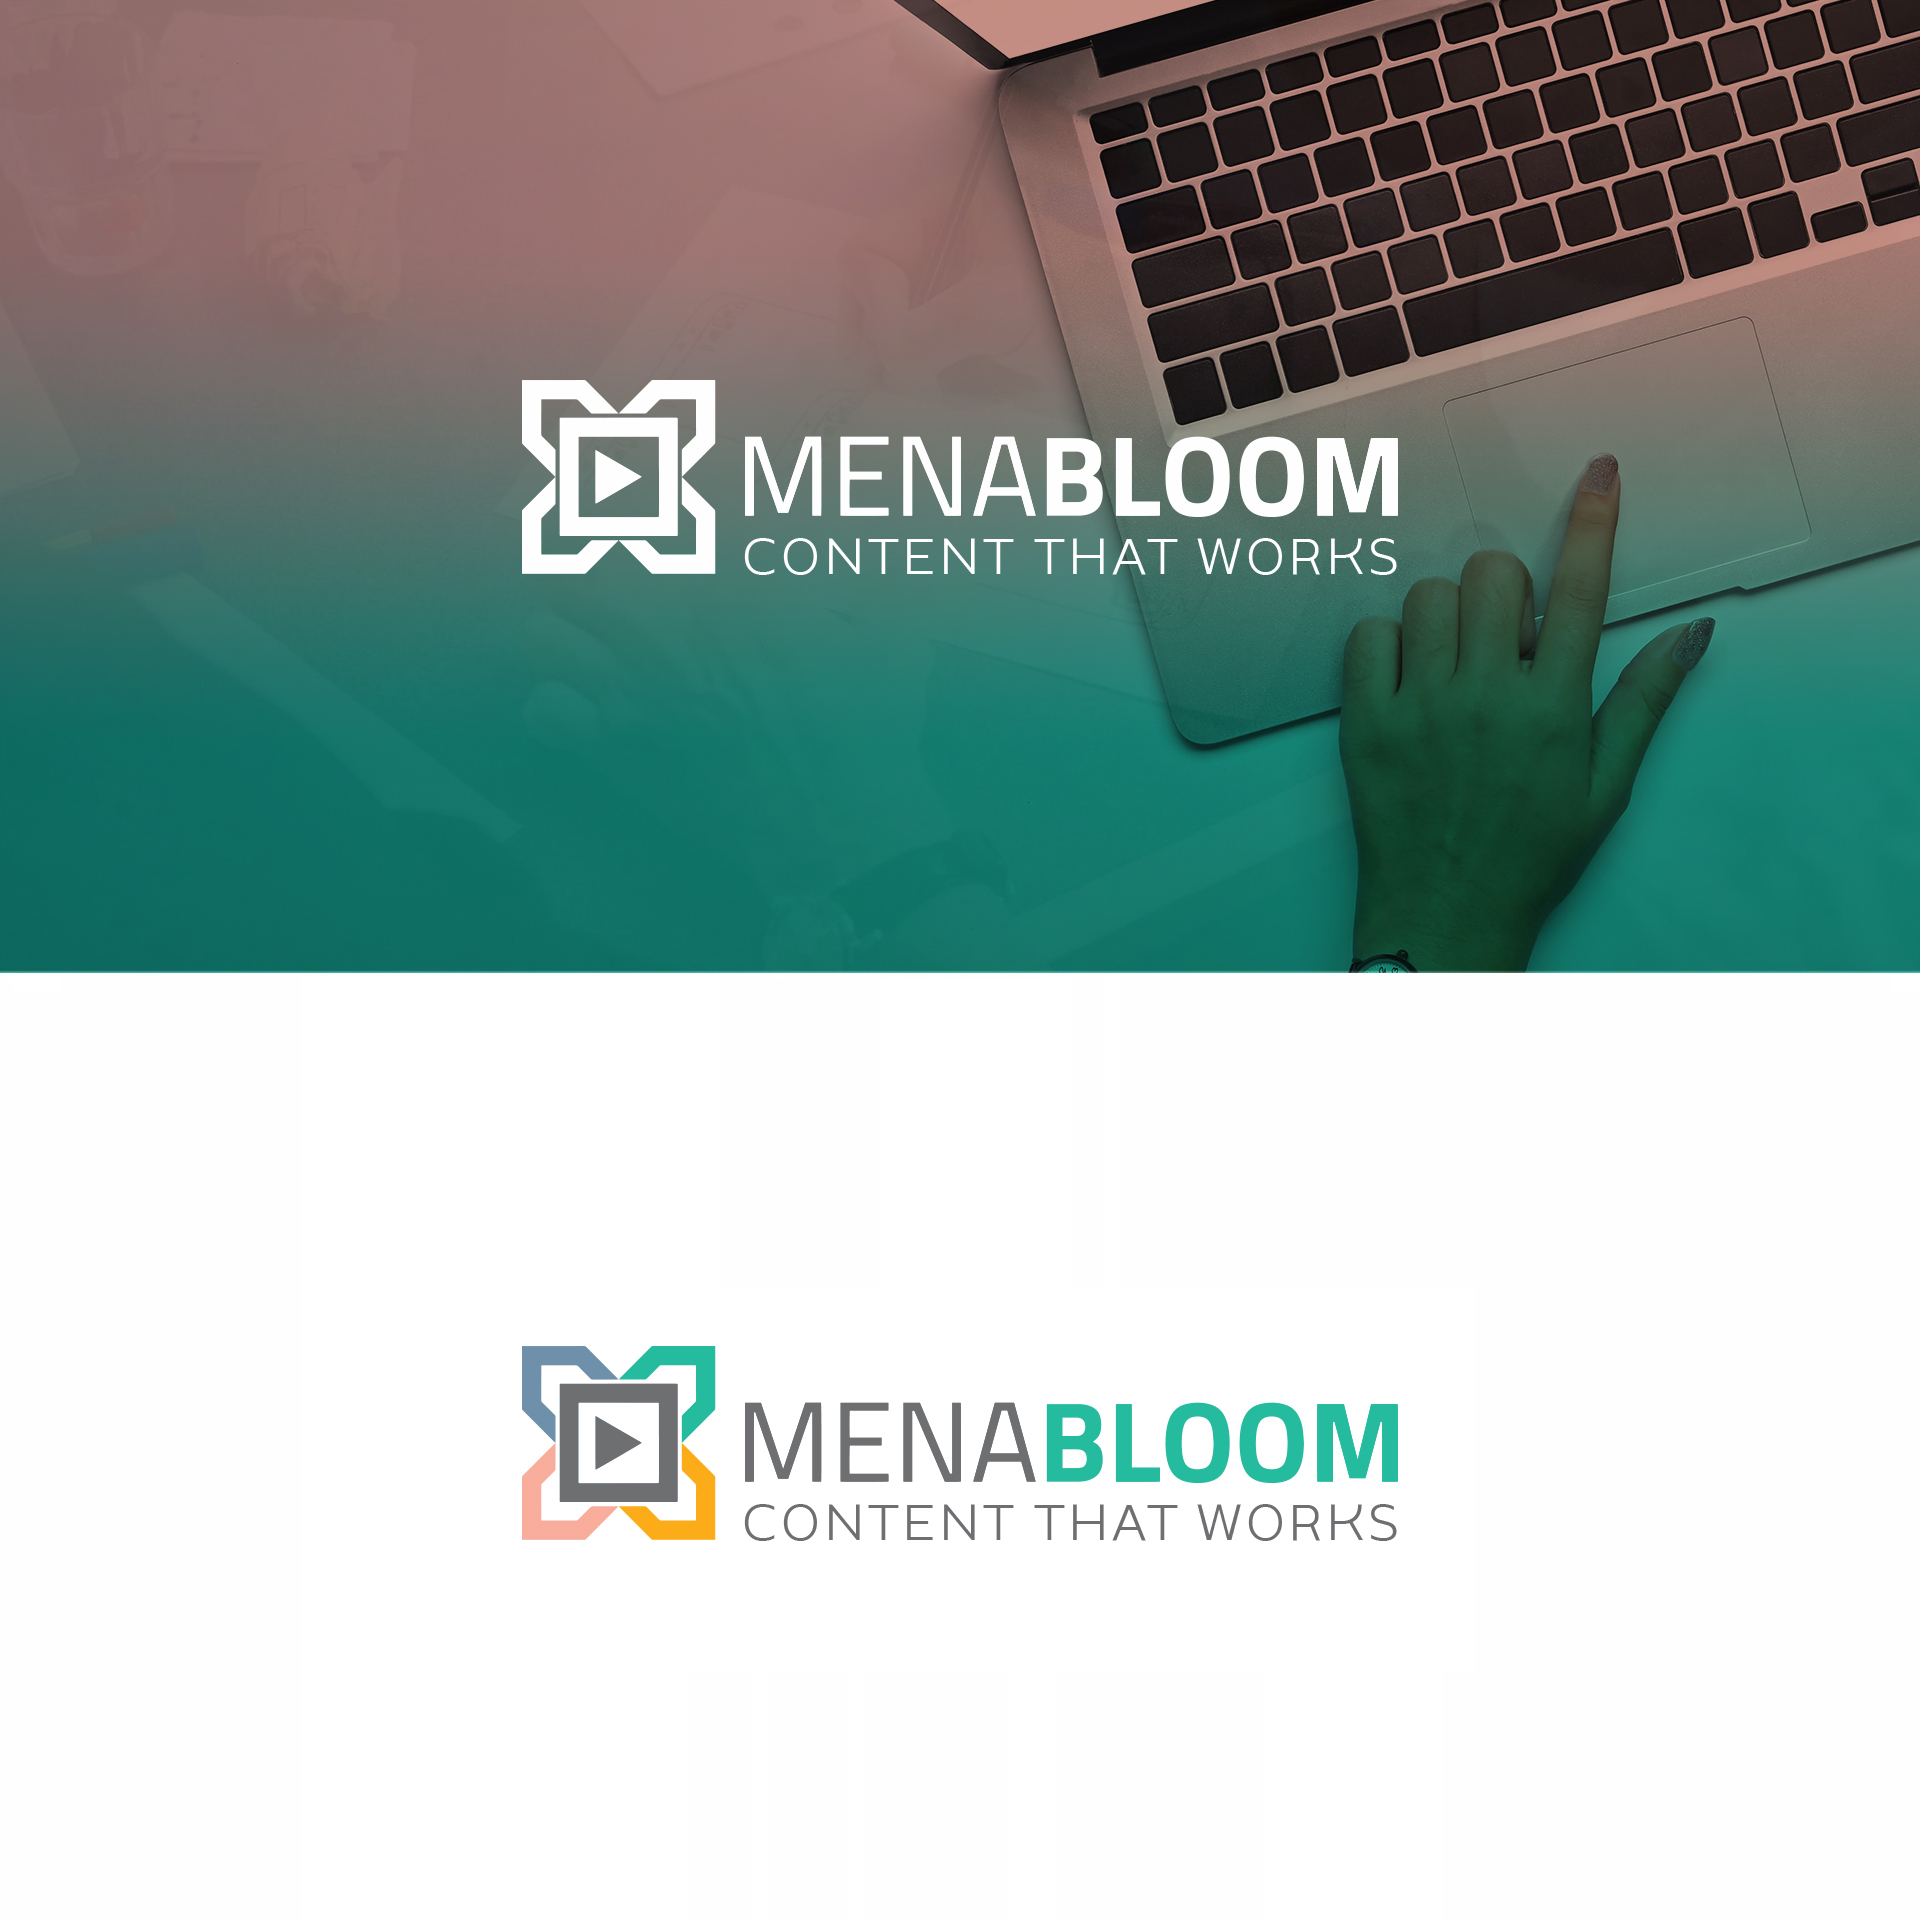 MENA Bloom: The story behind the name